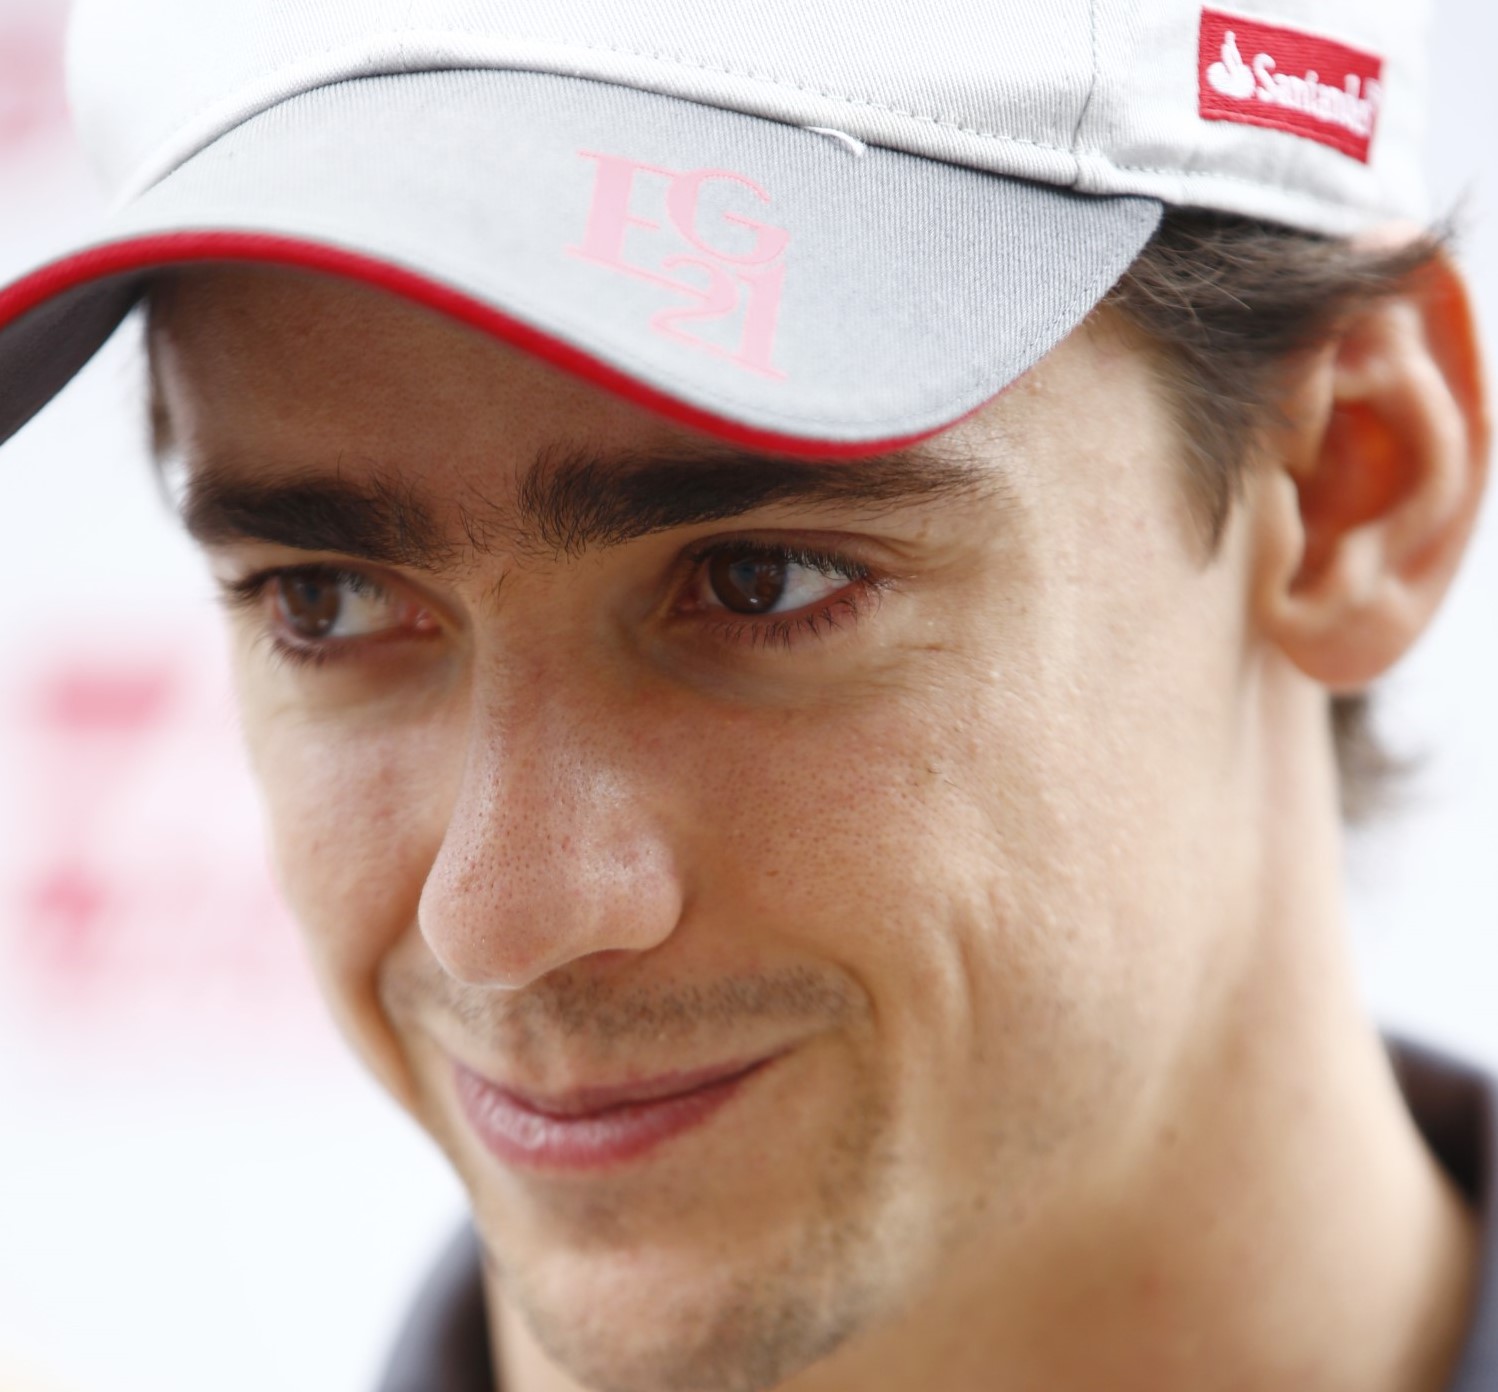 Anti-American Haas team driver Esteban Gutierrez from Mexico. Trump is right - all of our jobs are being shipped to Mexico and overseas. Even the American Haas team hires foreign drivers